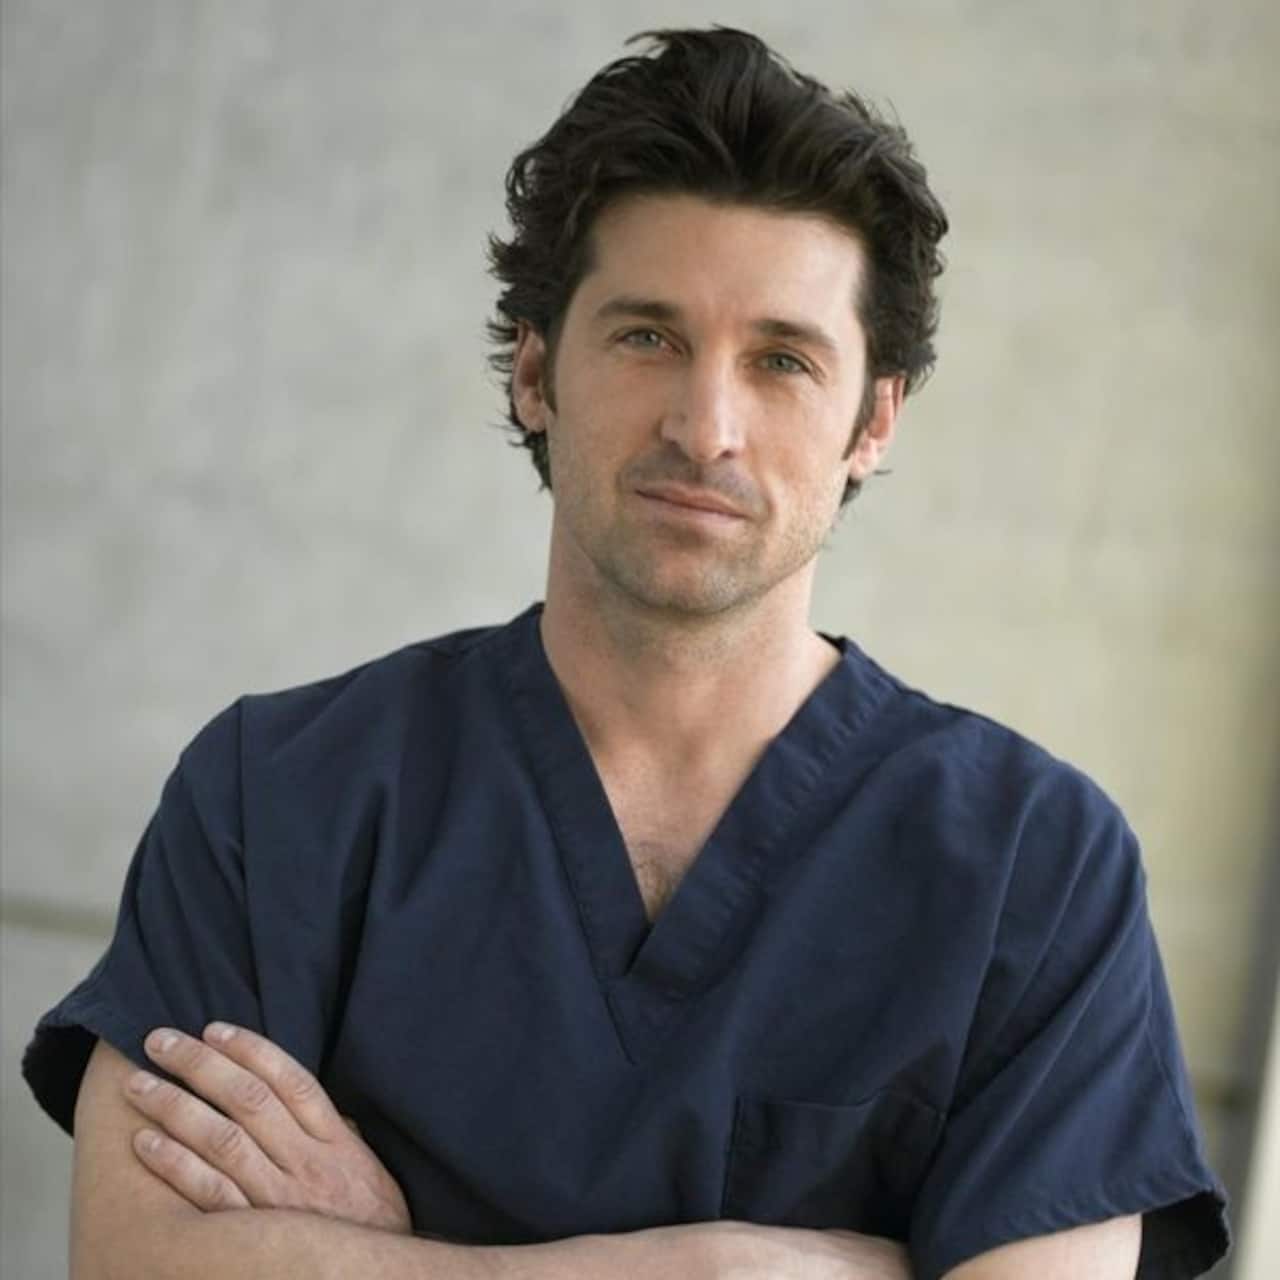 Patrick Dempsey on his return to Grey's Anatomy: There were a lot of familiar faces and new faces